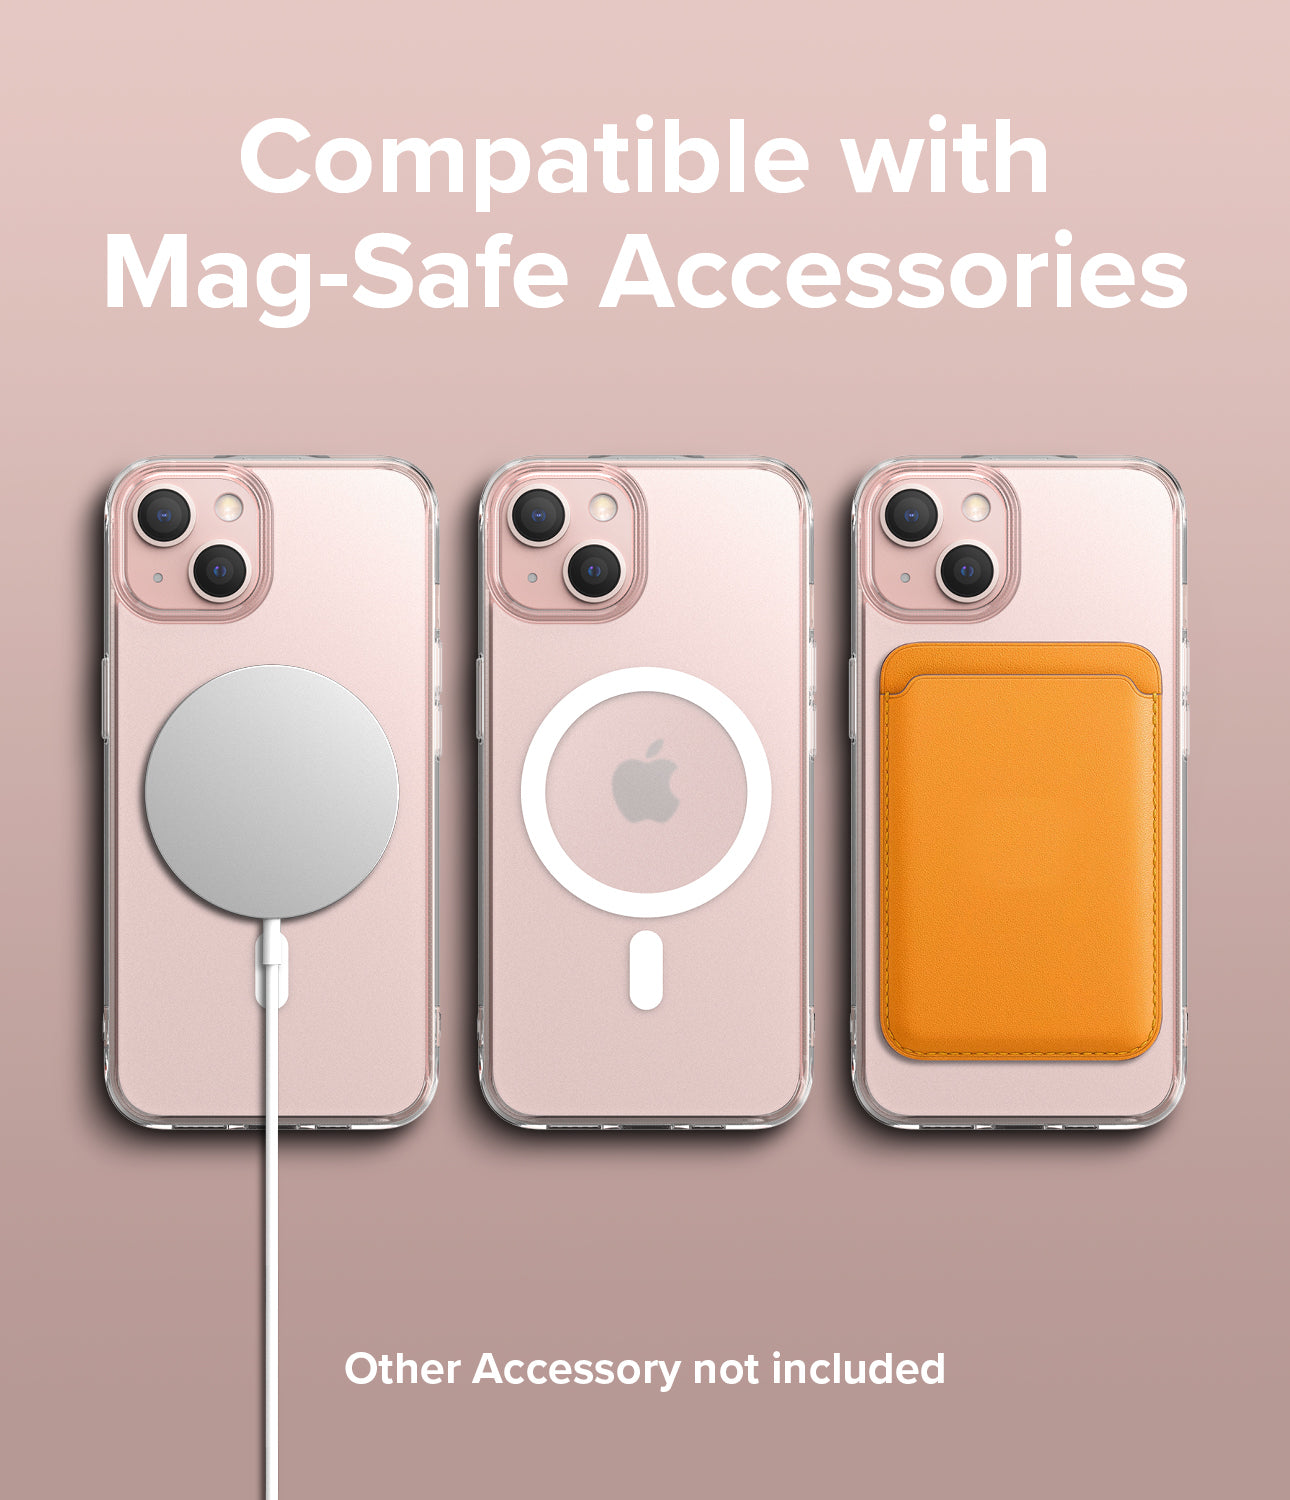 iPhone 13 Mini Case | Fusion Magnetic - Compatible with Mag-Safe Accessories